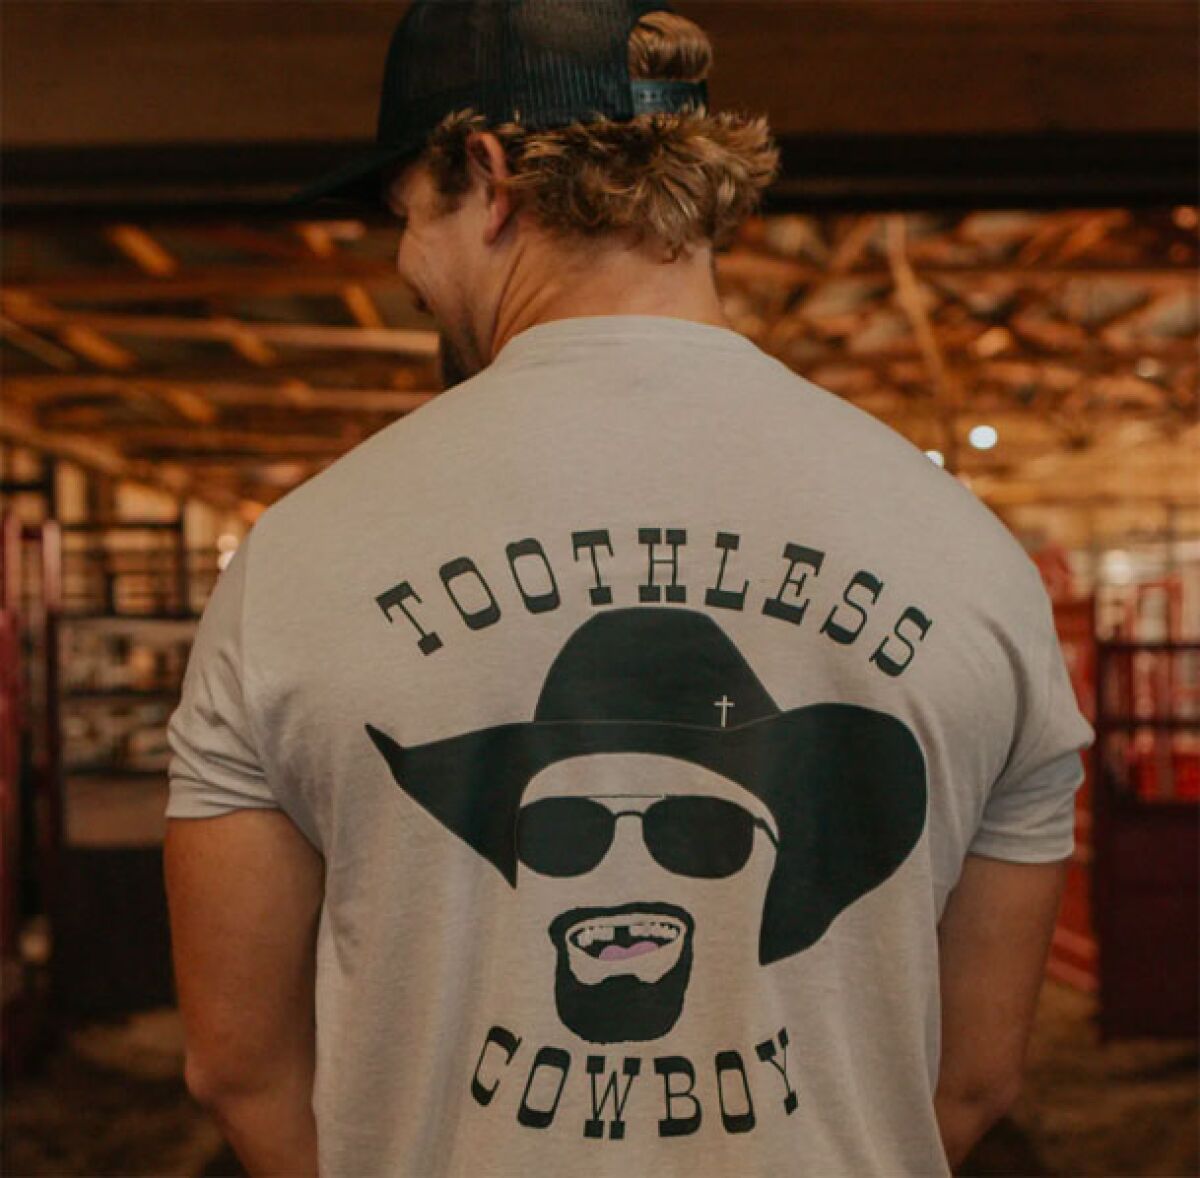 Caden McDonald models one of the more popular shirts from his Toothless Cowboy collection.